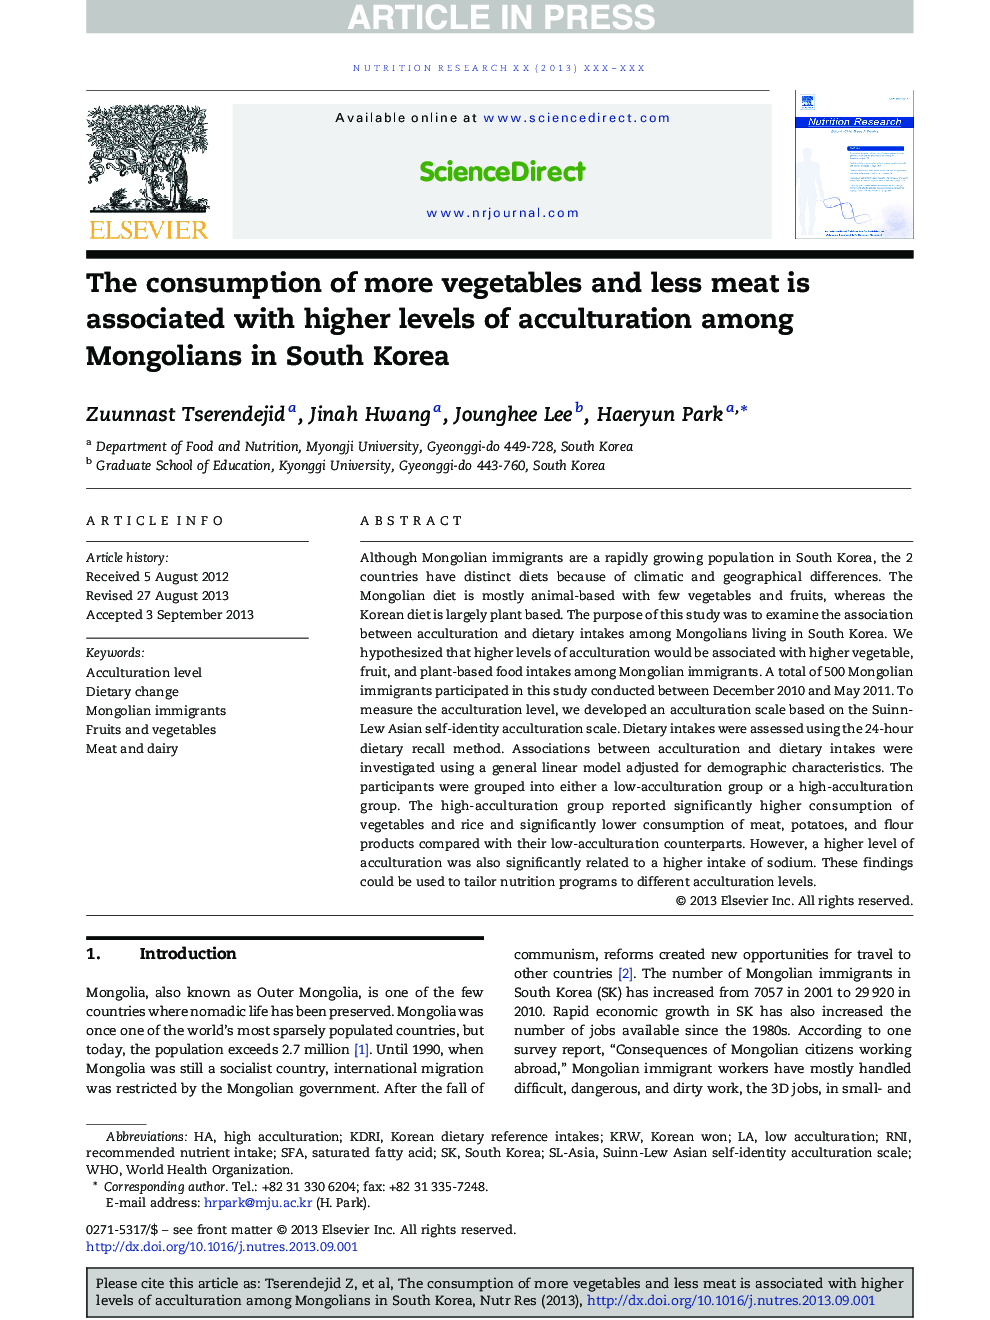 The consumption of more vegetables and less meat is associated with higher levels of acculturation among Mongolians in South Korea